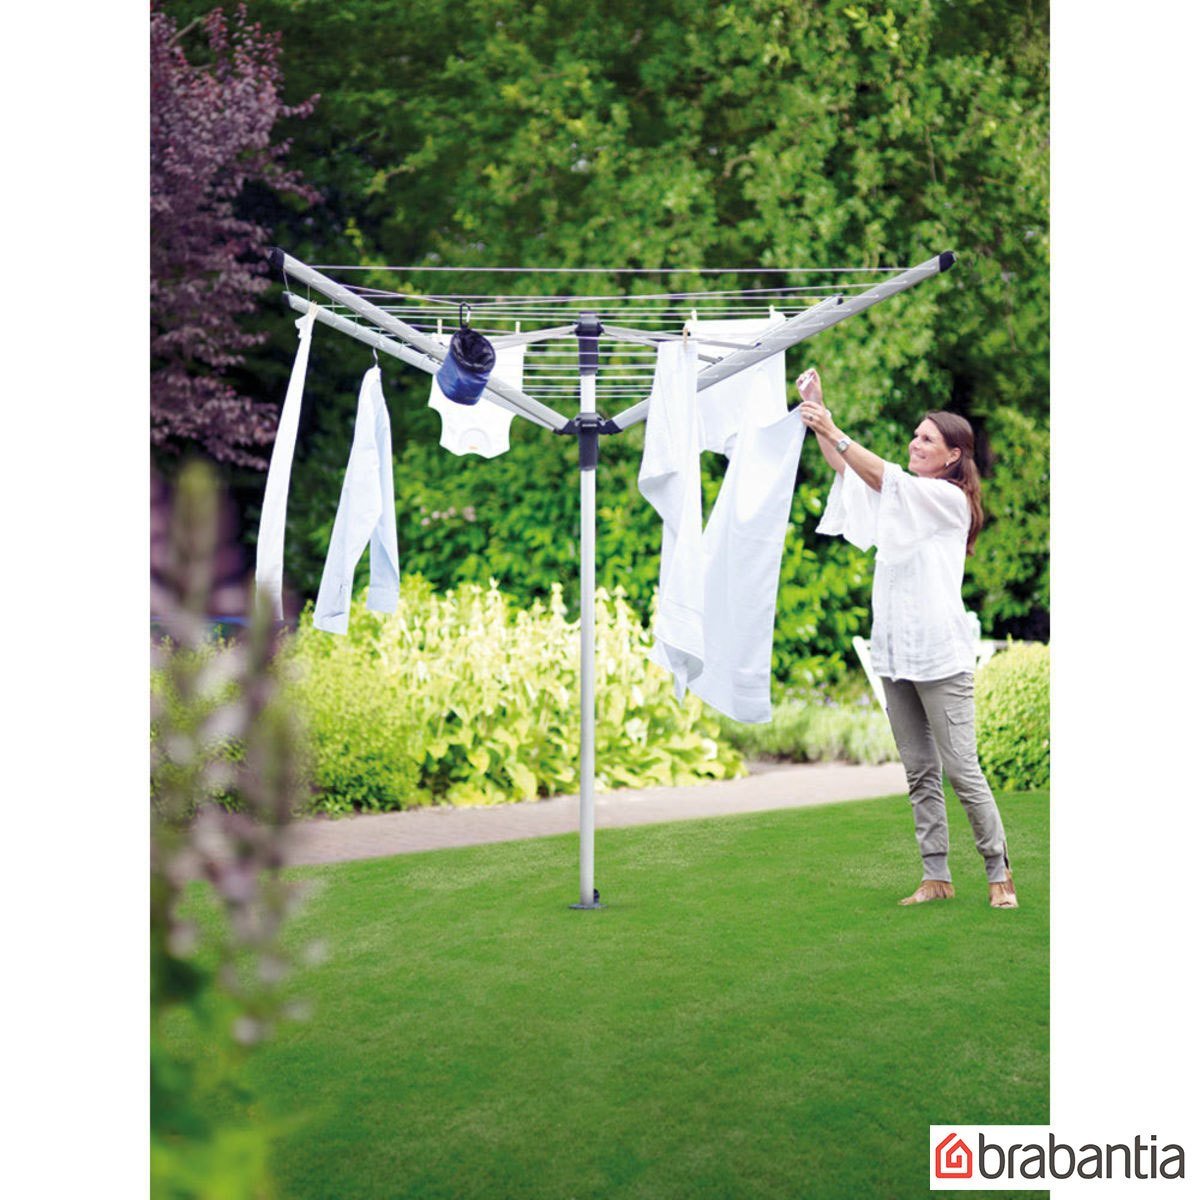 Brabantia Lift-O-Matic 60m Rotary Airer with Ground Spike + Cover - Signature Retail Stores